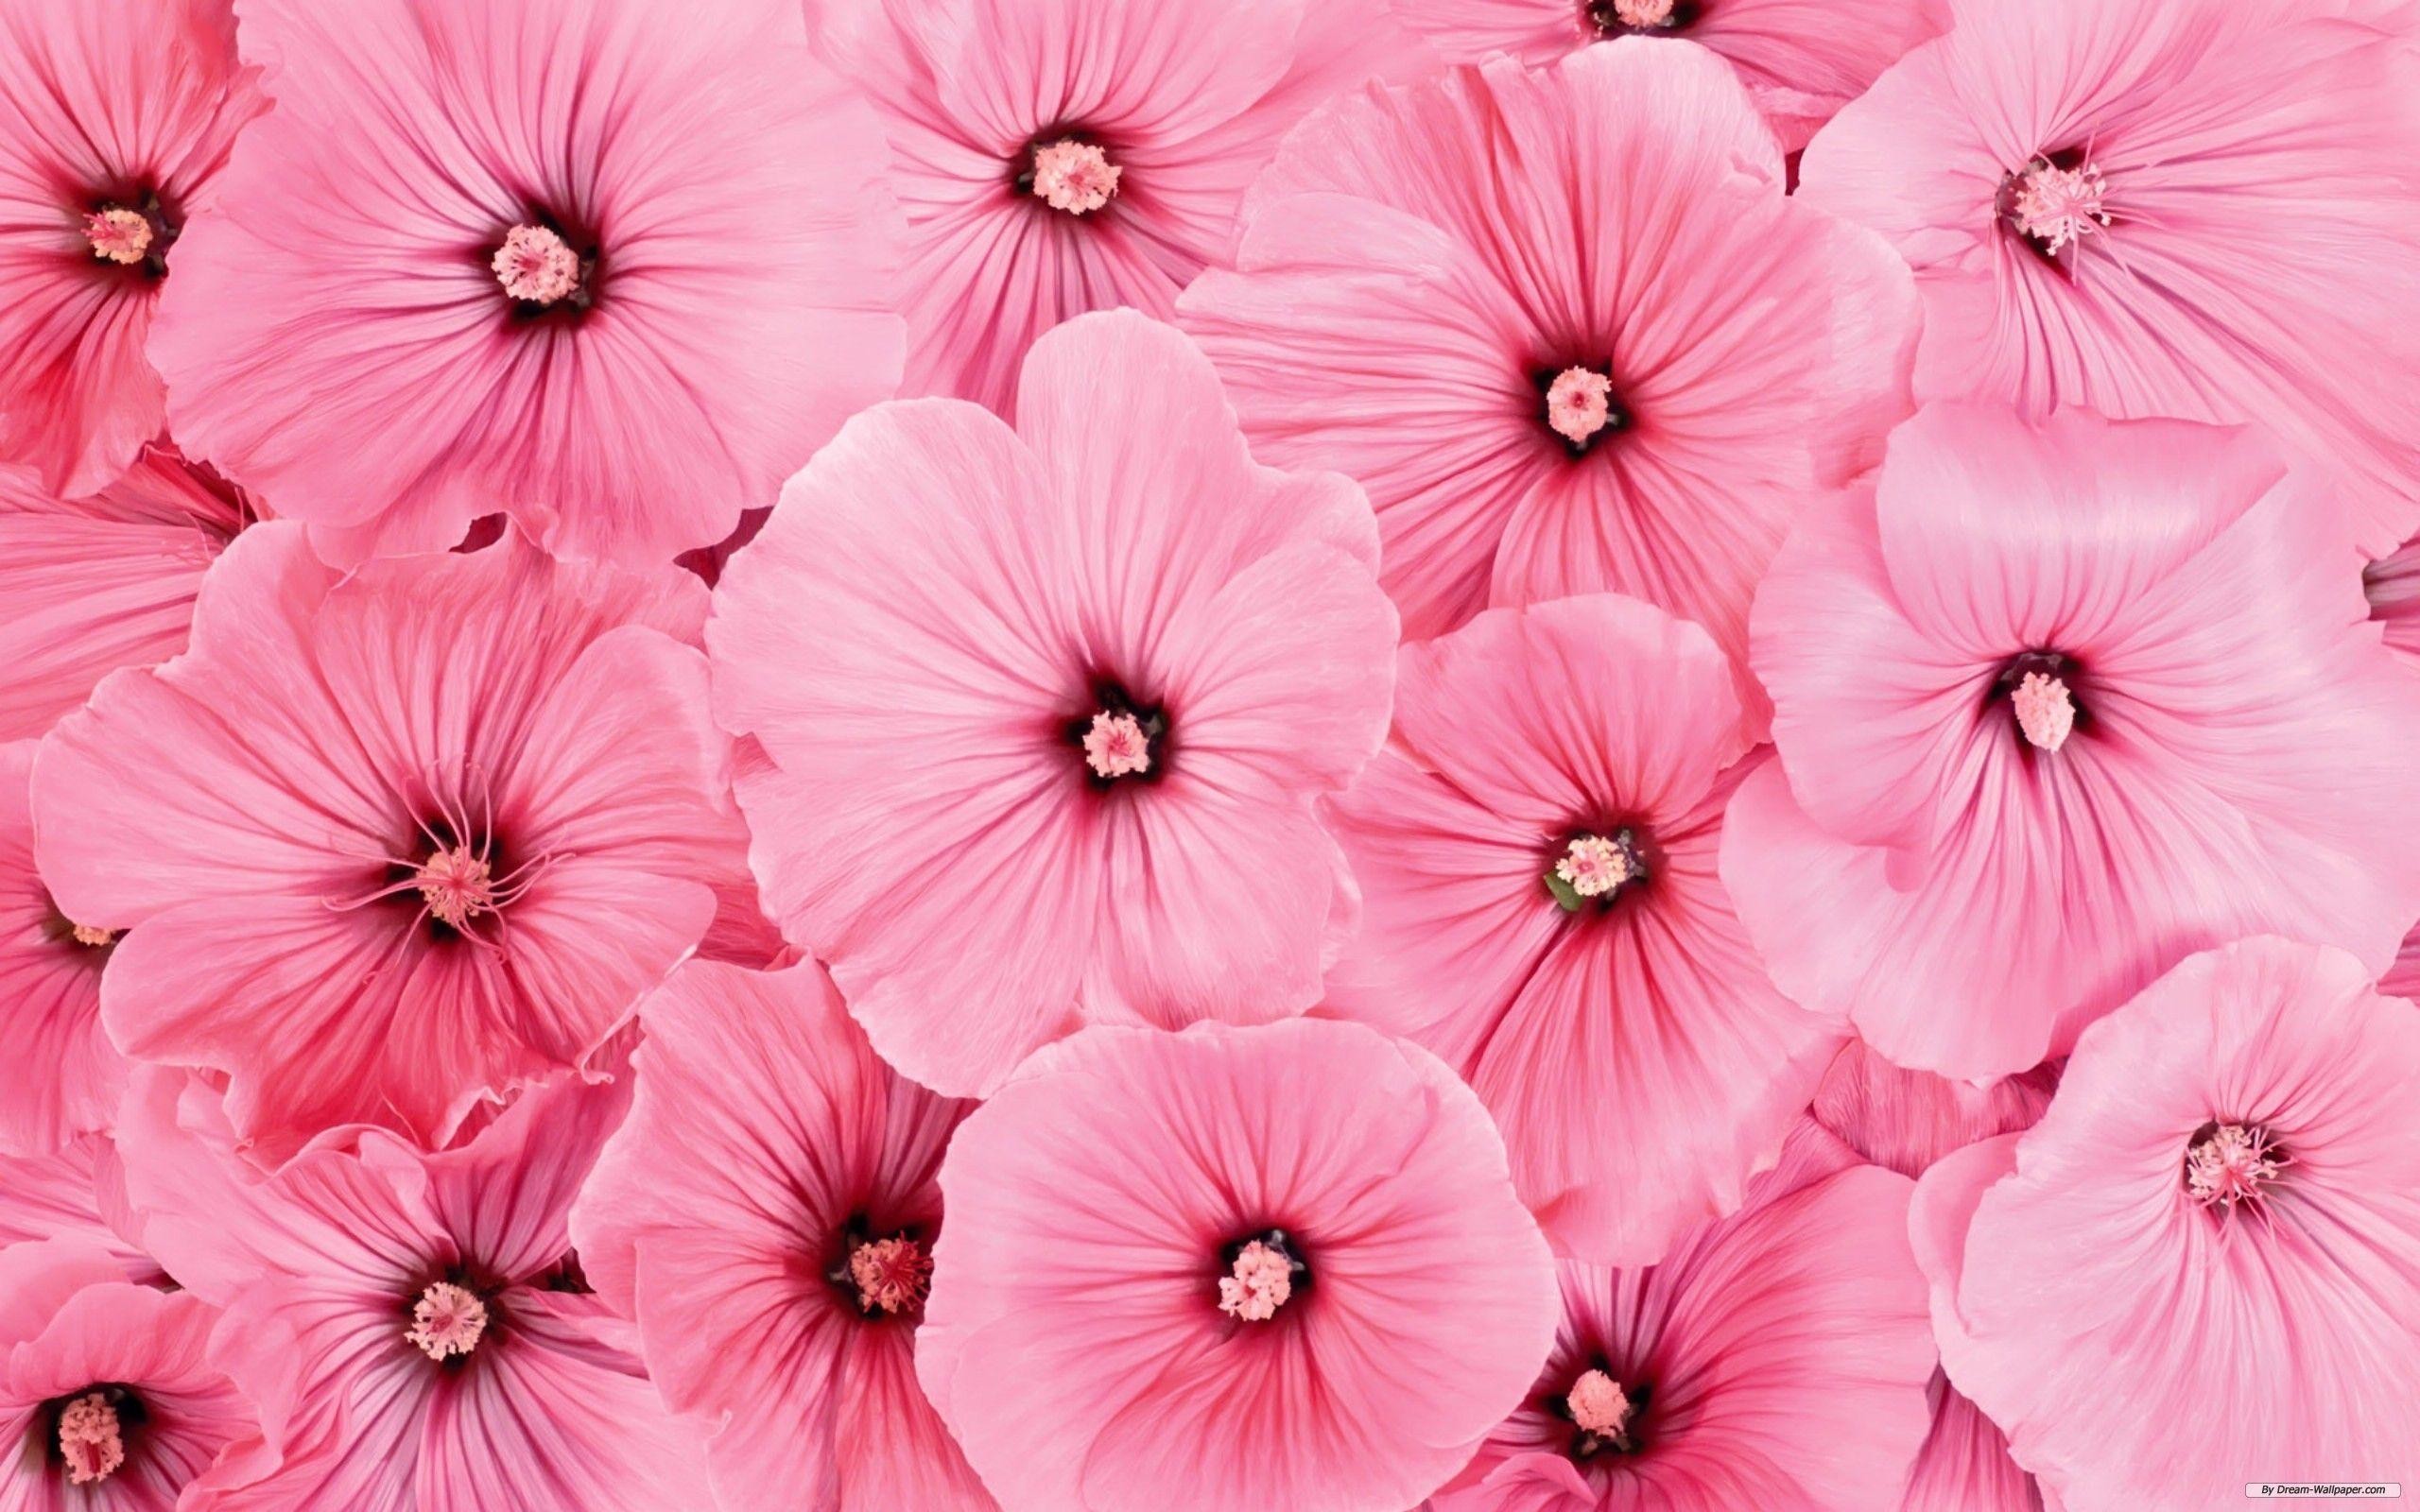 Free Download 71 Pink Flower Wallpapers On Wallpaperplay 2560x1600 For Your Desktop Mobile Tablet Explore 47 Flower Pictures Wallpaper Free Flower Wallpaper Google Images Flowers Wallpaper Spring Flower Pictures Wallpaper